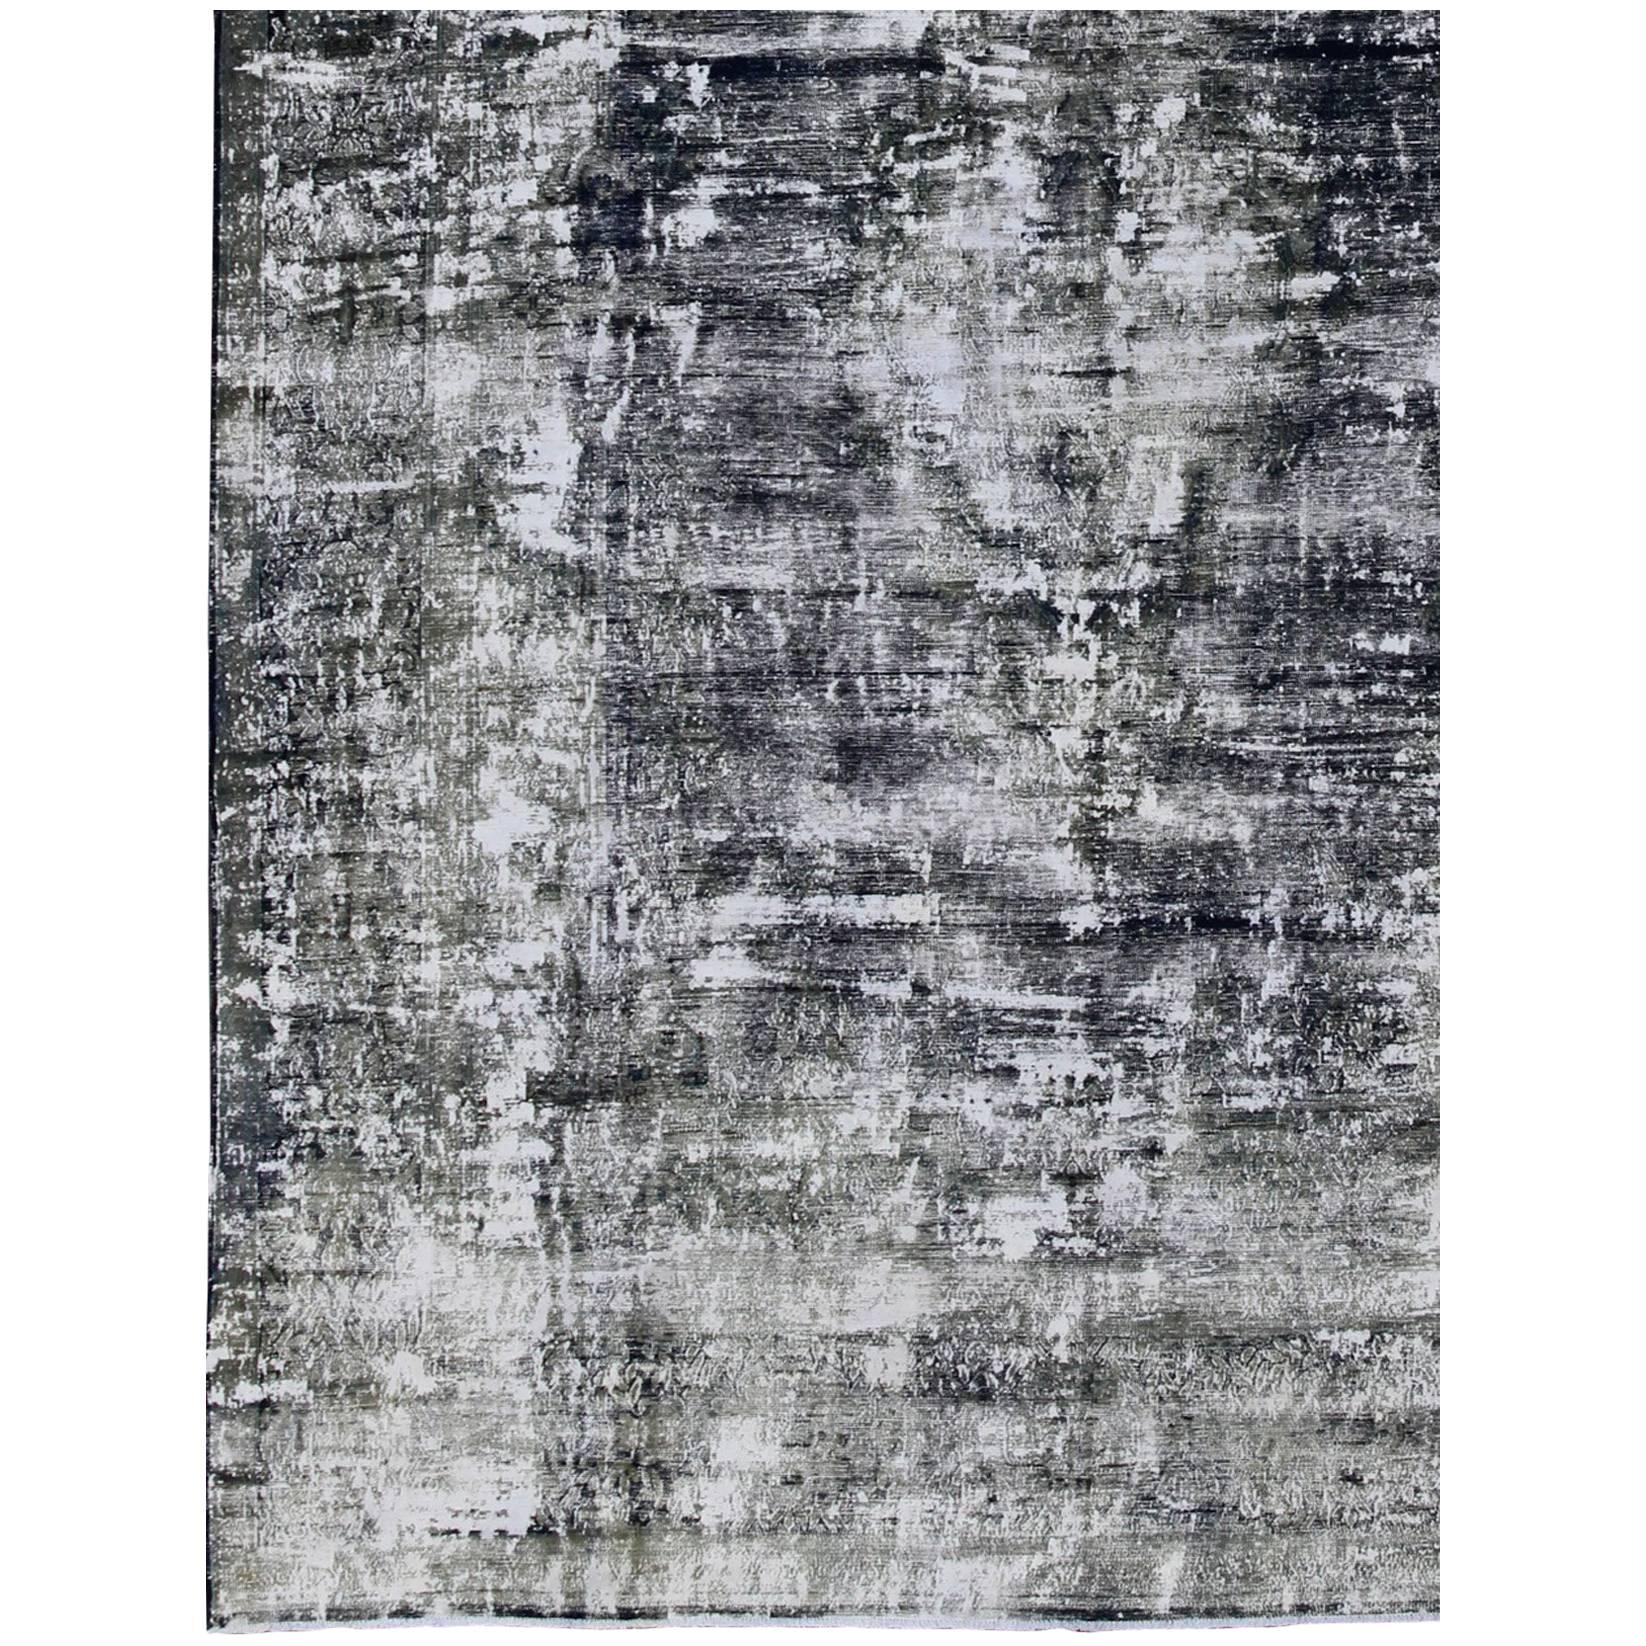  Distressed Vintage Persian Rug with Abstract Design in Dark Blue, Green & Gray & White.

Measures: 9'6 x 12'8

Distressed vintage Persian Rug with Modern abstract Design in gray, Charcoal and White colors. Vintage distressed Persian rug, for modern